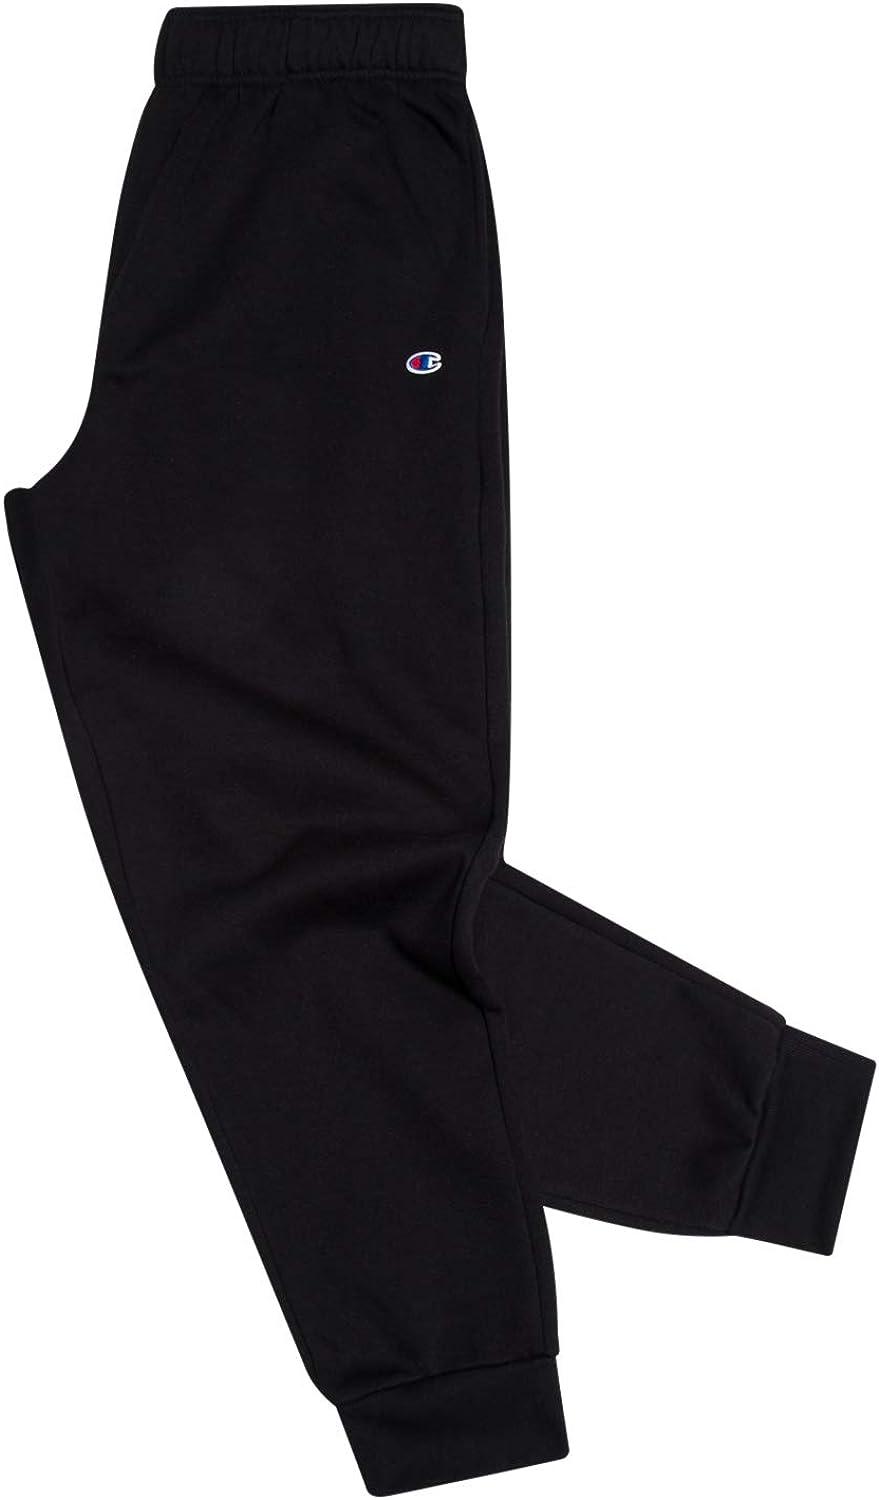 Champion Men's Big & Tall Lounge Pants Authentic Athleticwear